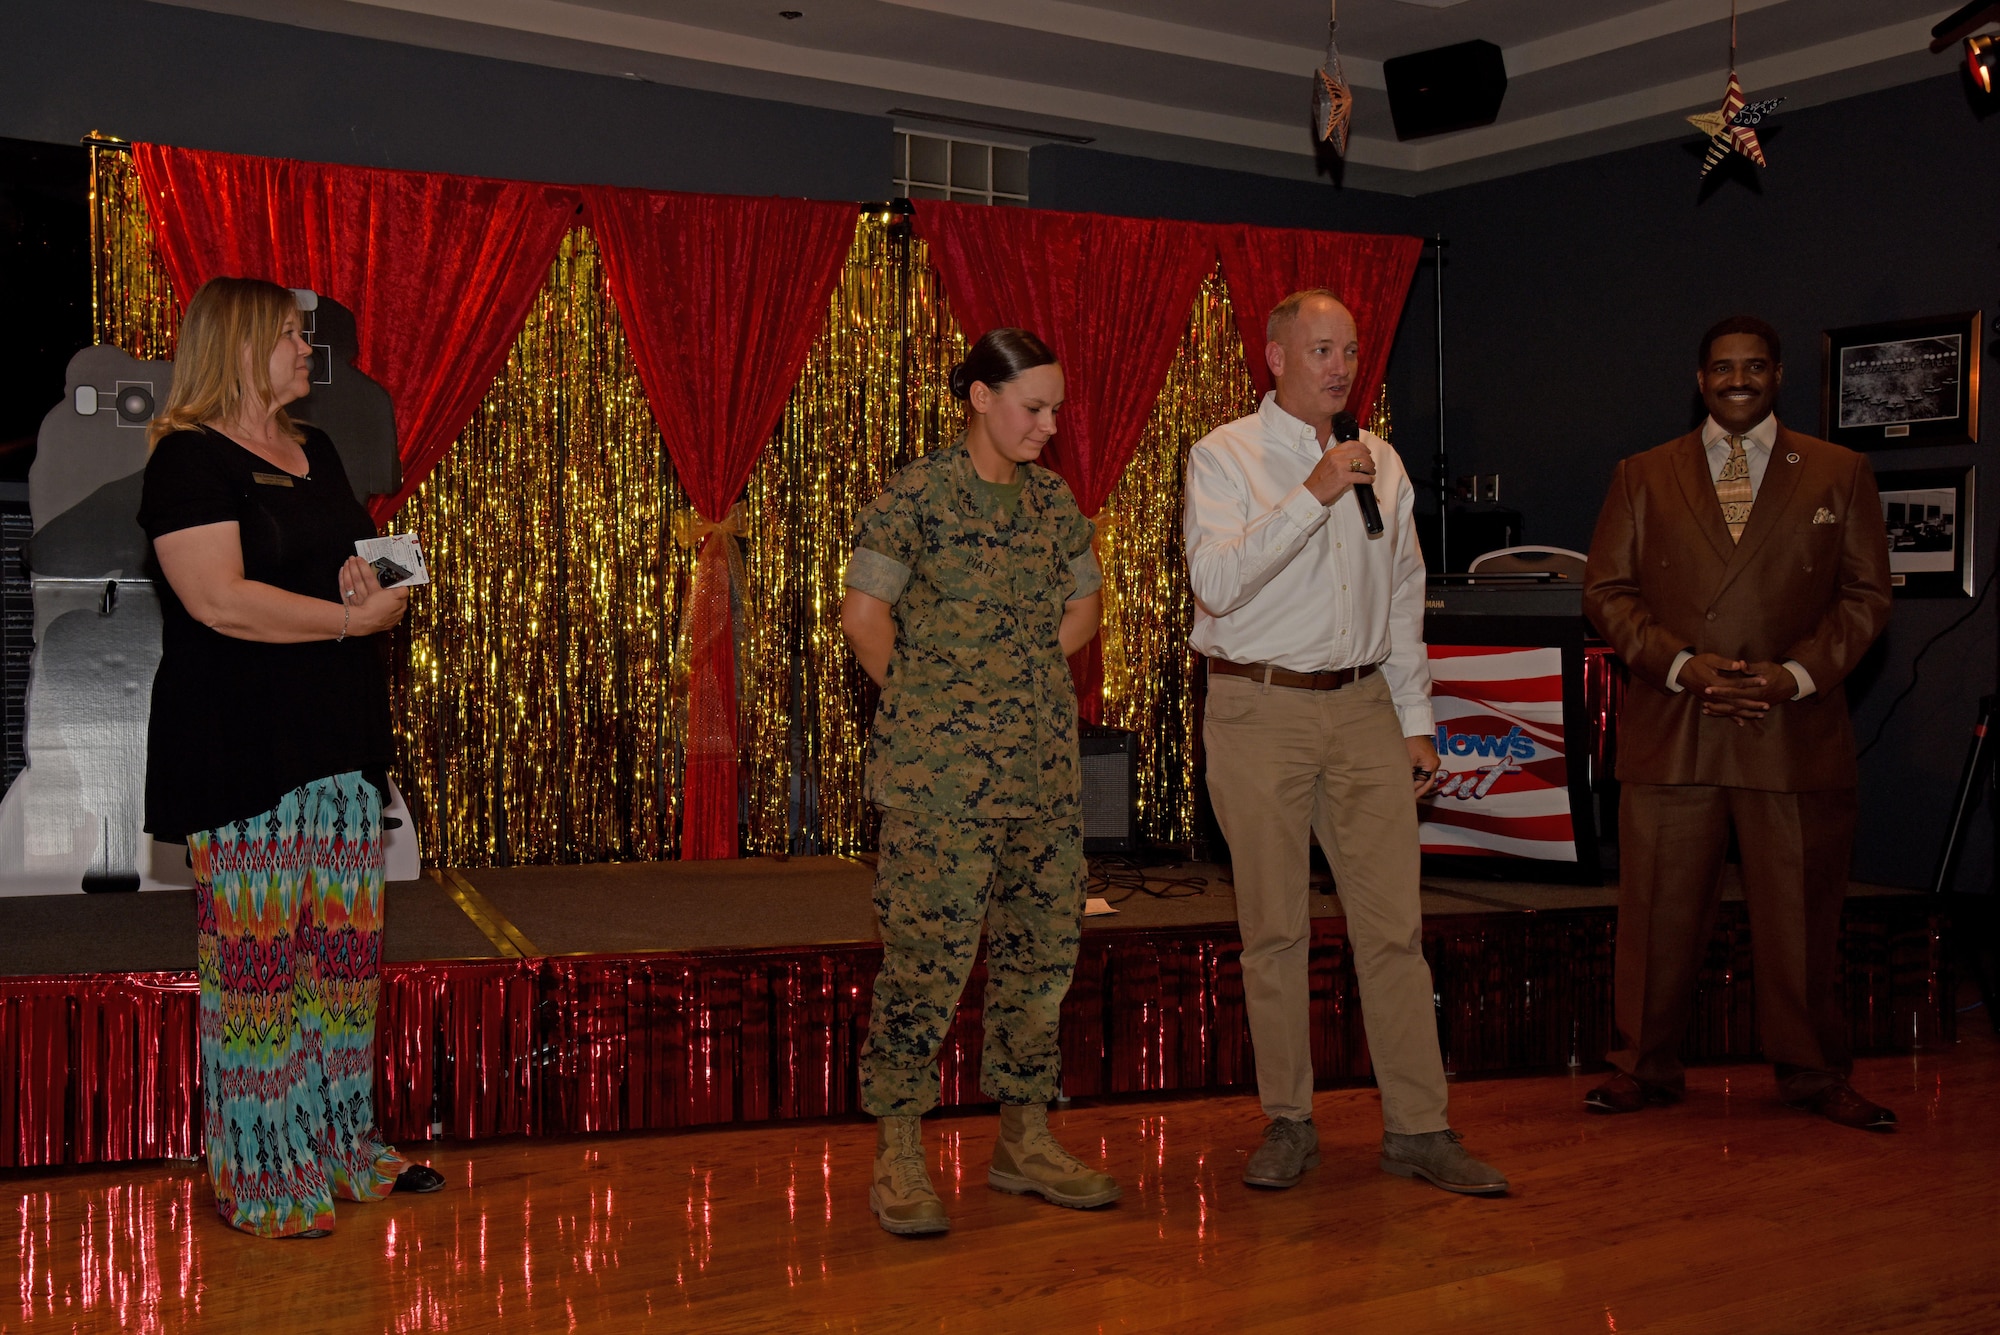 U.S. Air Force Col. Michael Downs, 17th Training Wing Commander, speaks at the end of “Goodfellow’s Got Talent” at the event center on Goodfellow Air Force Base, Texas, March 24, 2017. Downs thanked everyone for attending and congratulated U.S. Marine Corps Lance Cpl. Morgan Piatt, Marine Corps Detachment student, and the winners of the event. (U.S. Air Force photo by Staff Sgt. Joshua Edwards/Released)